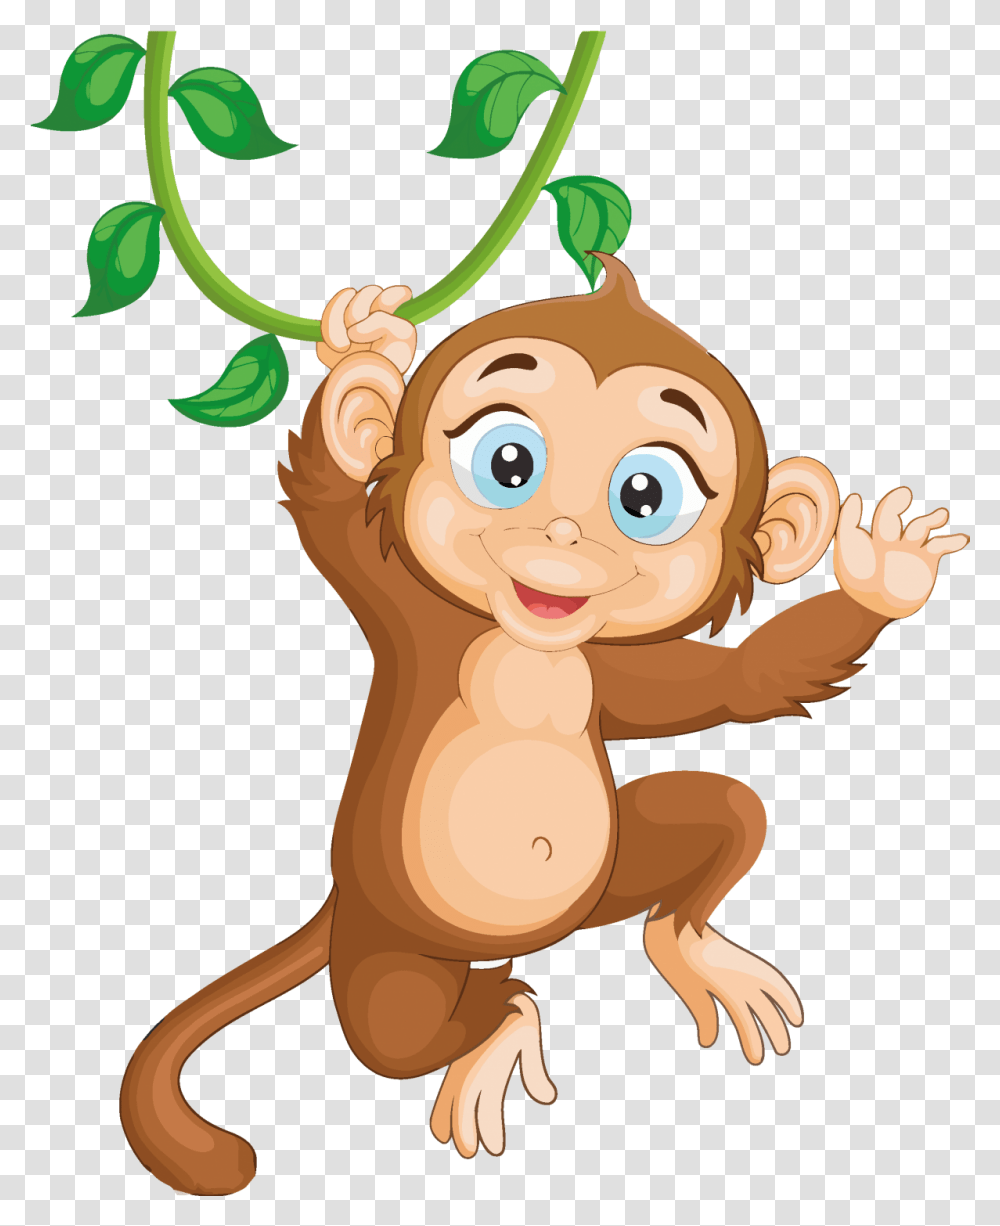 Monkey Clipart Download Cartoon Monkey Hang In Tree Monkey Cartoon, Toy, Cupid, Plant, Graphics Transparent Png